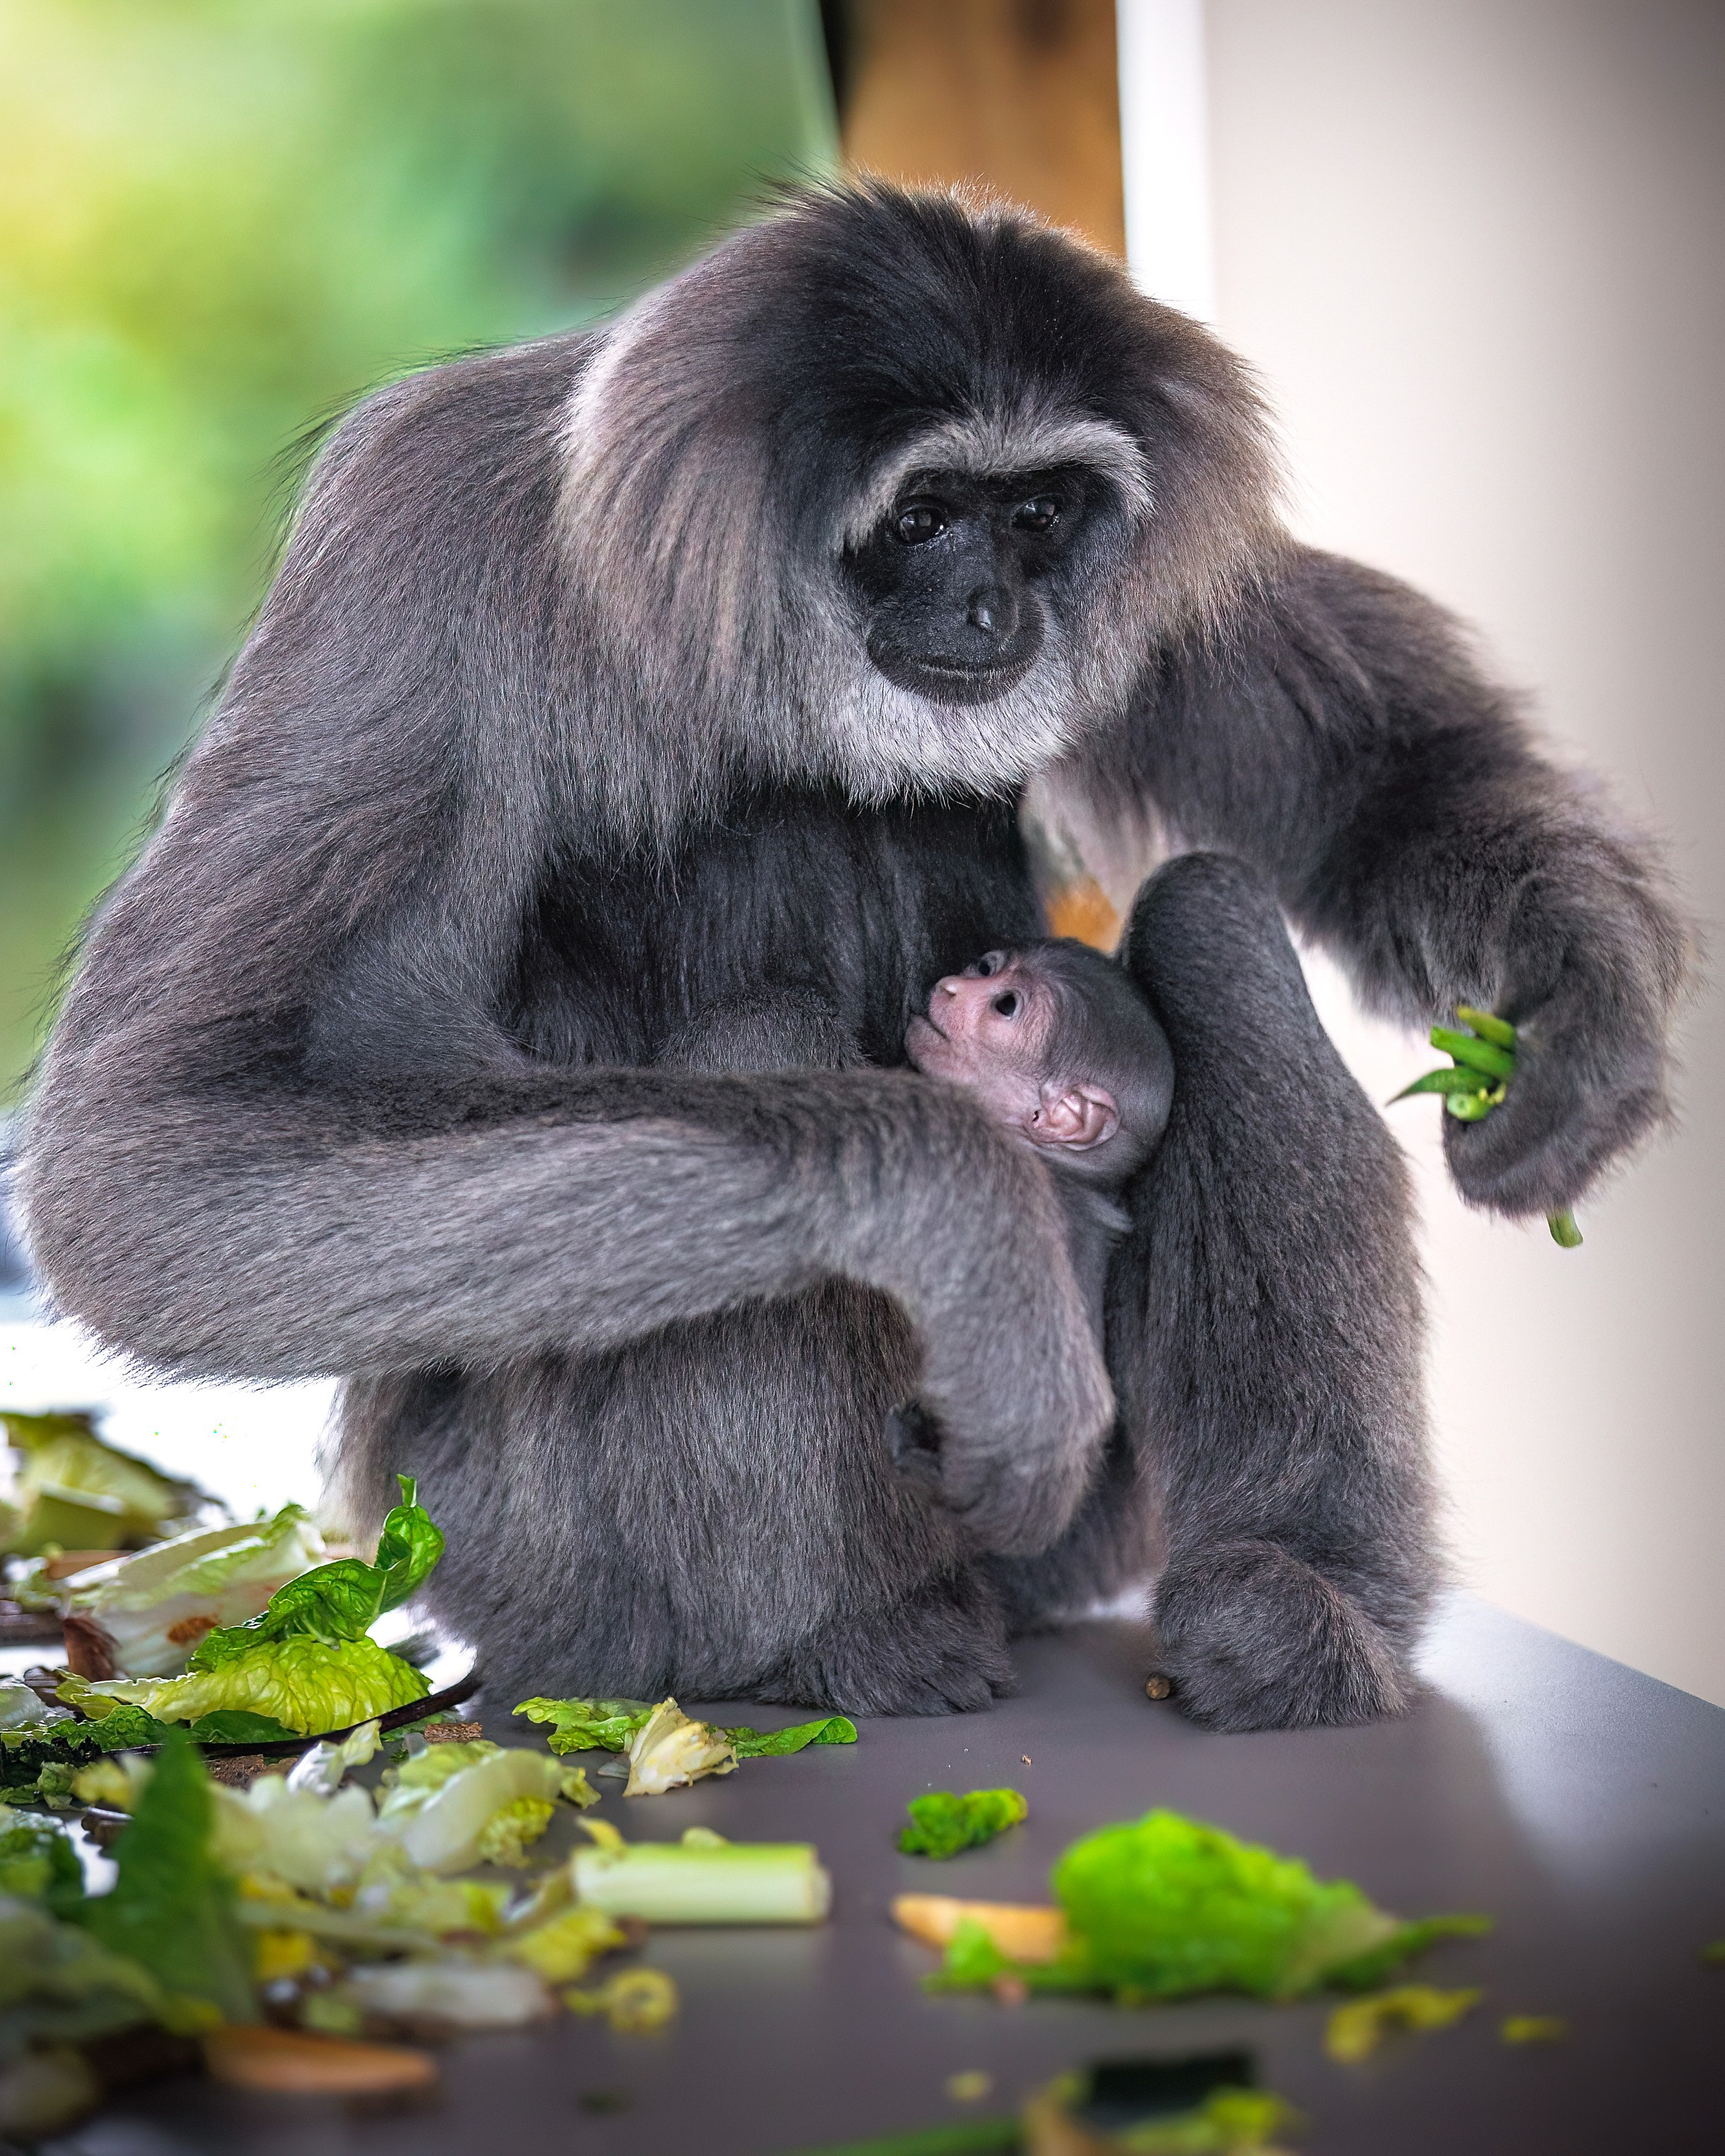 The baby silvery gibbon sitting in its mother's lap 